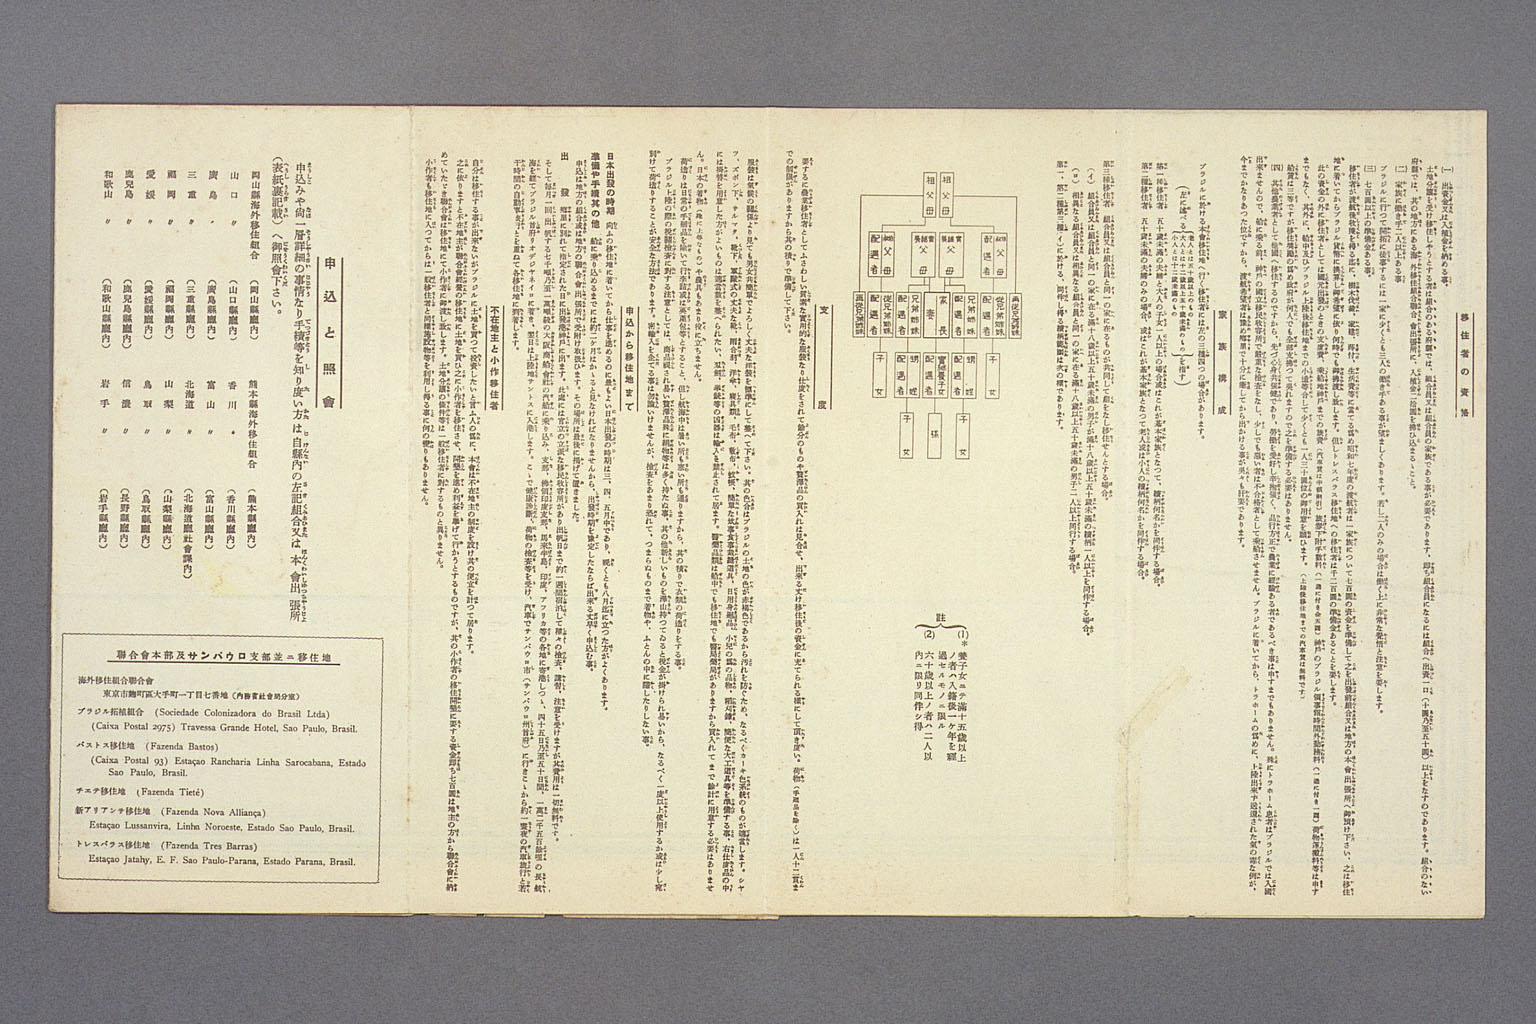 Image “Federation of Overseas Emigrant Cooperatives pamphlet”